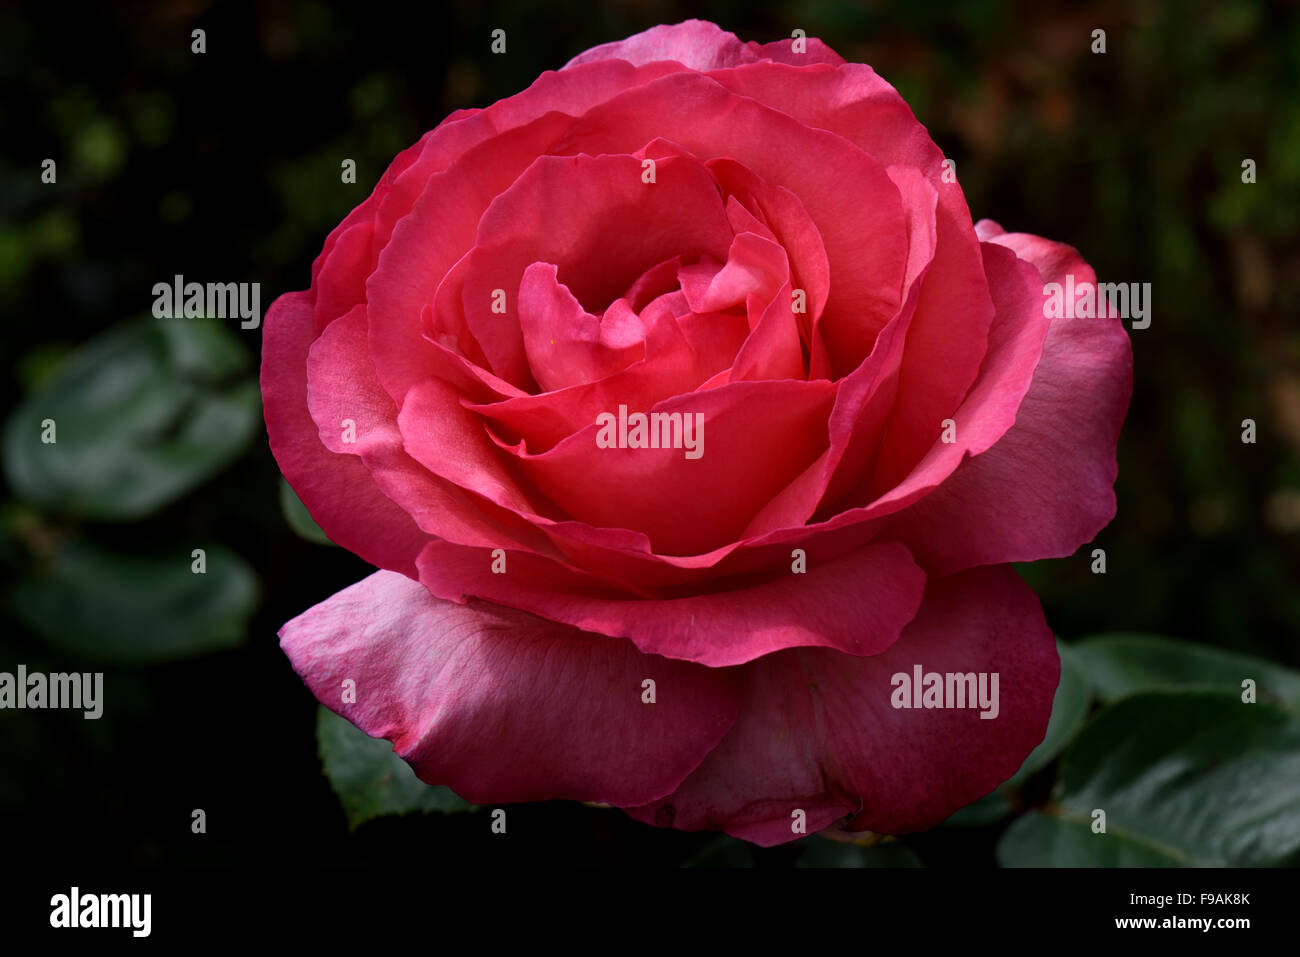 A perfect red rose bloom against a dark background Stock Photo